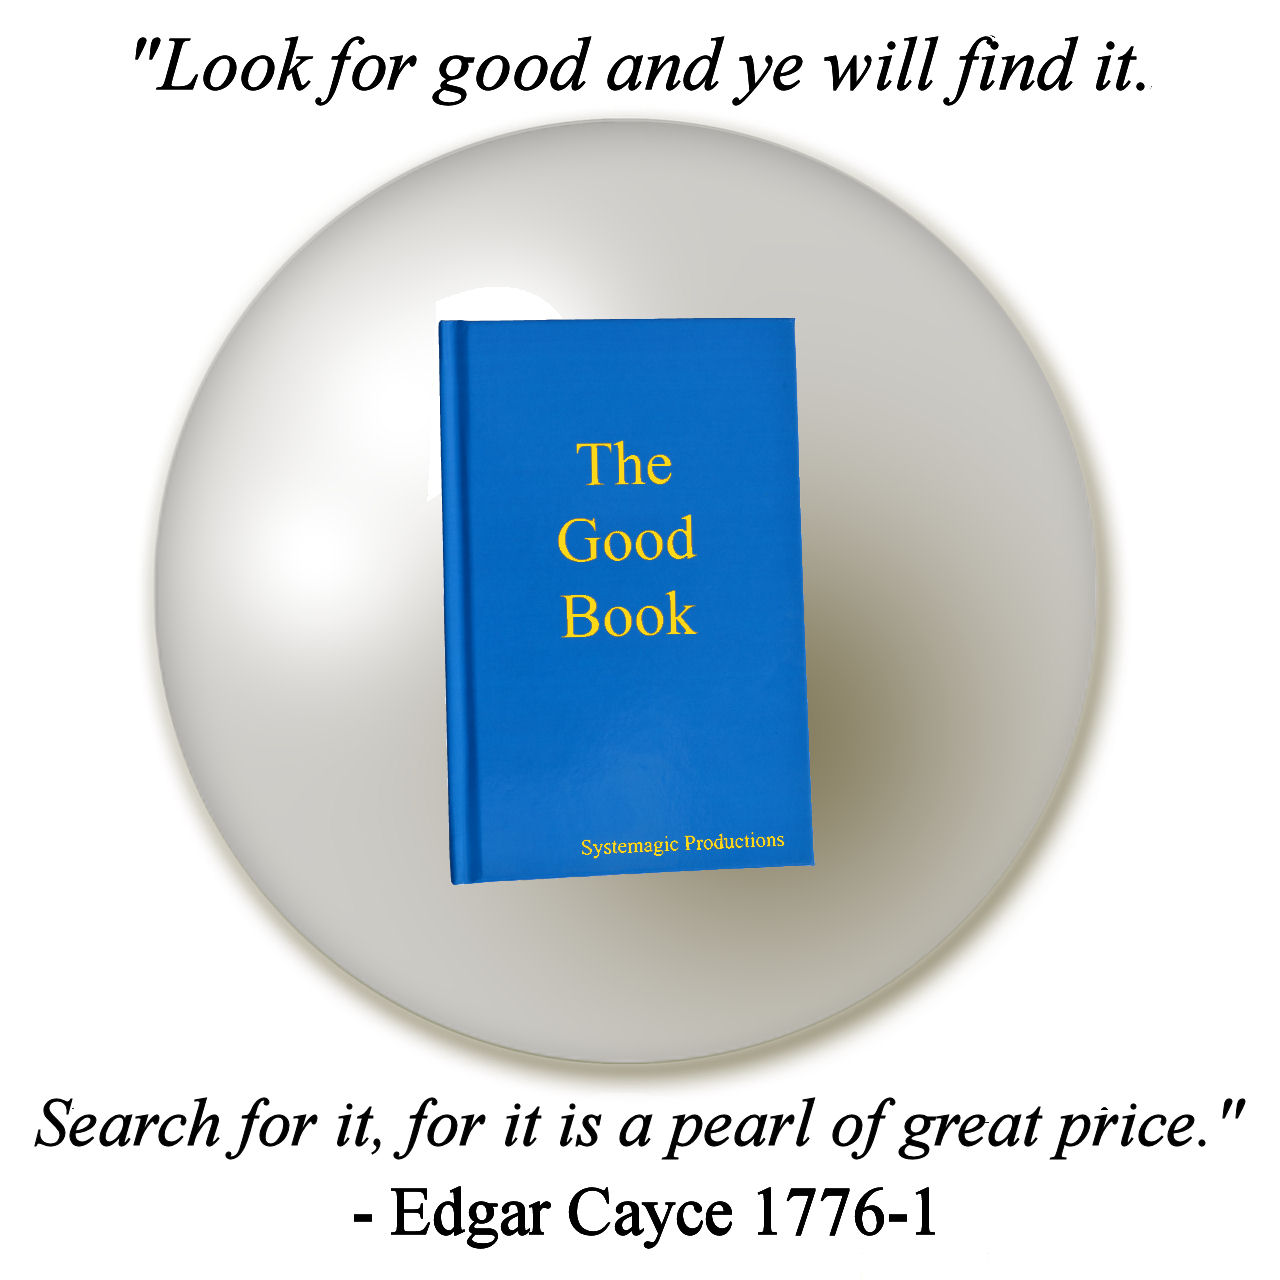 Look for good and ye will find it. Search for it, for it is a pearl of great price.